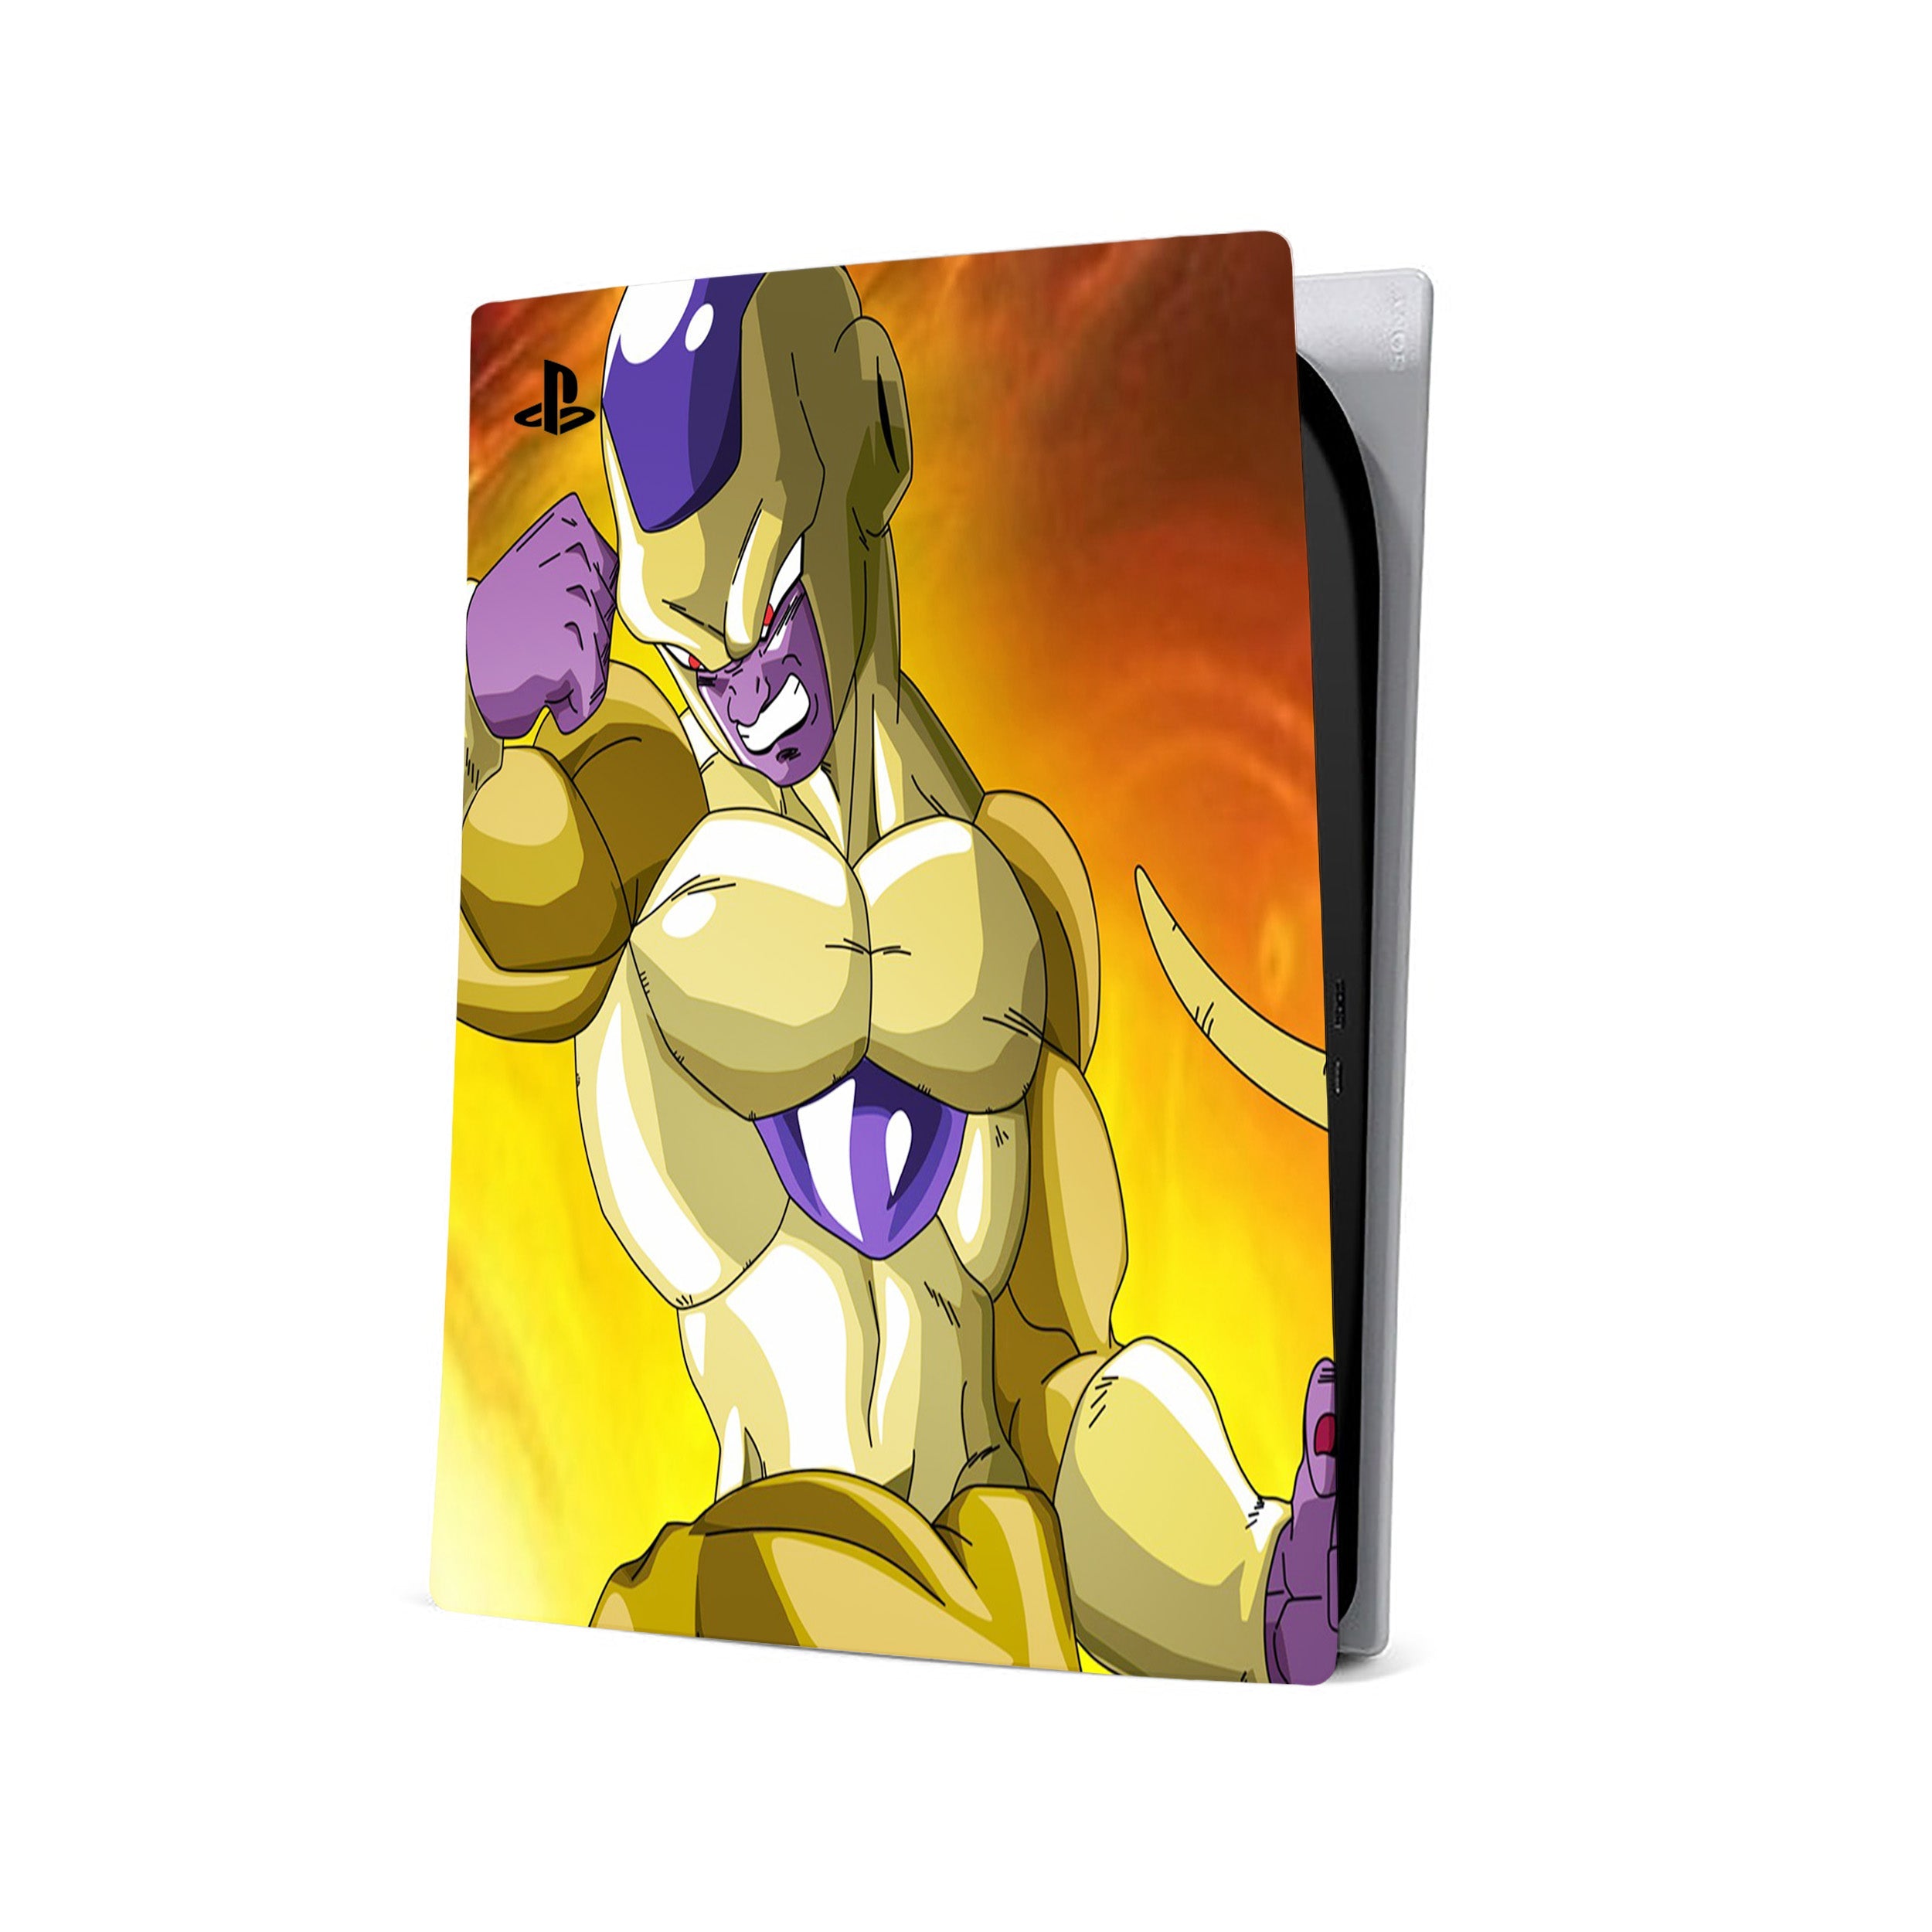 A video game skin featuring a Dragon Ball Super Frieza design for the PS5.